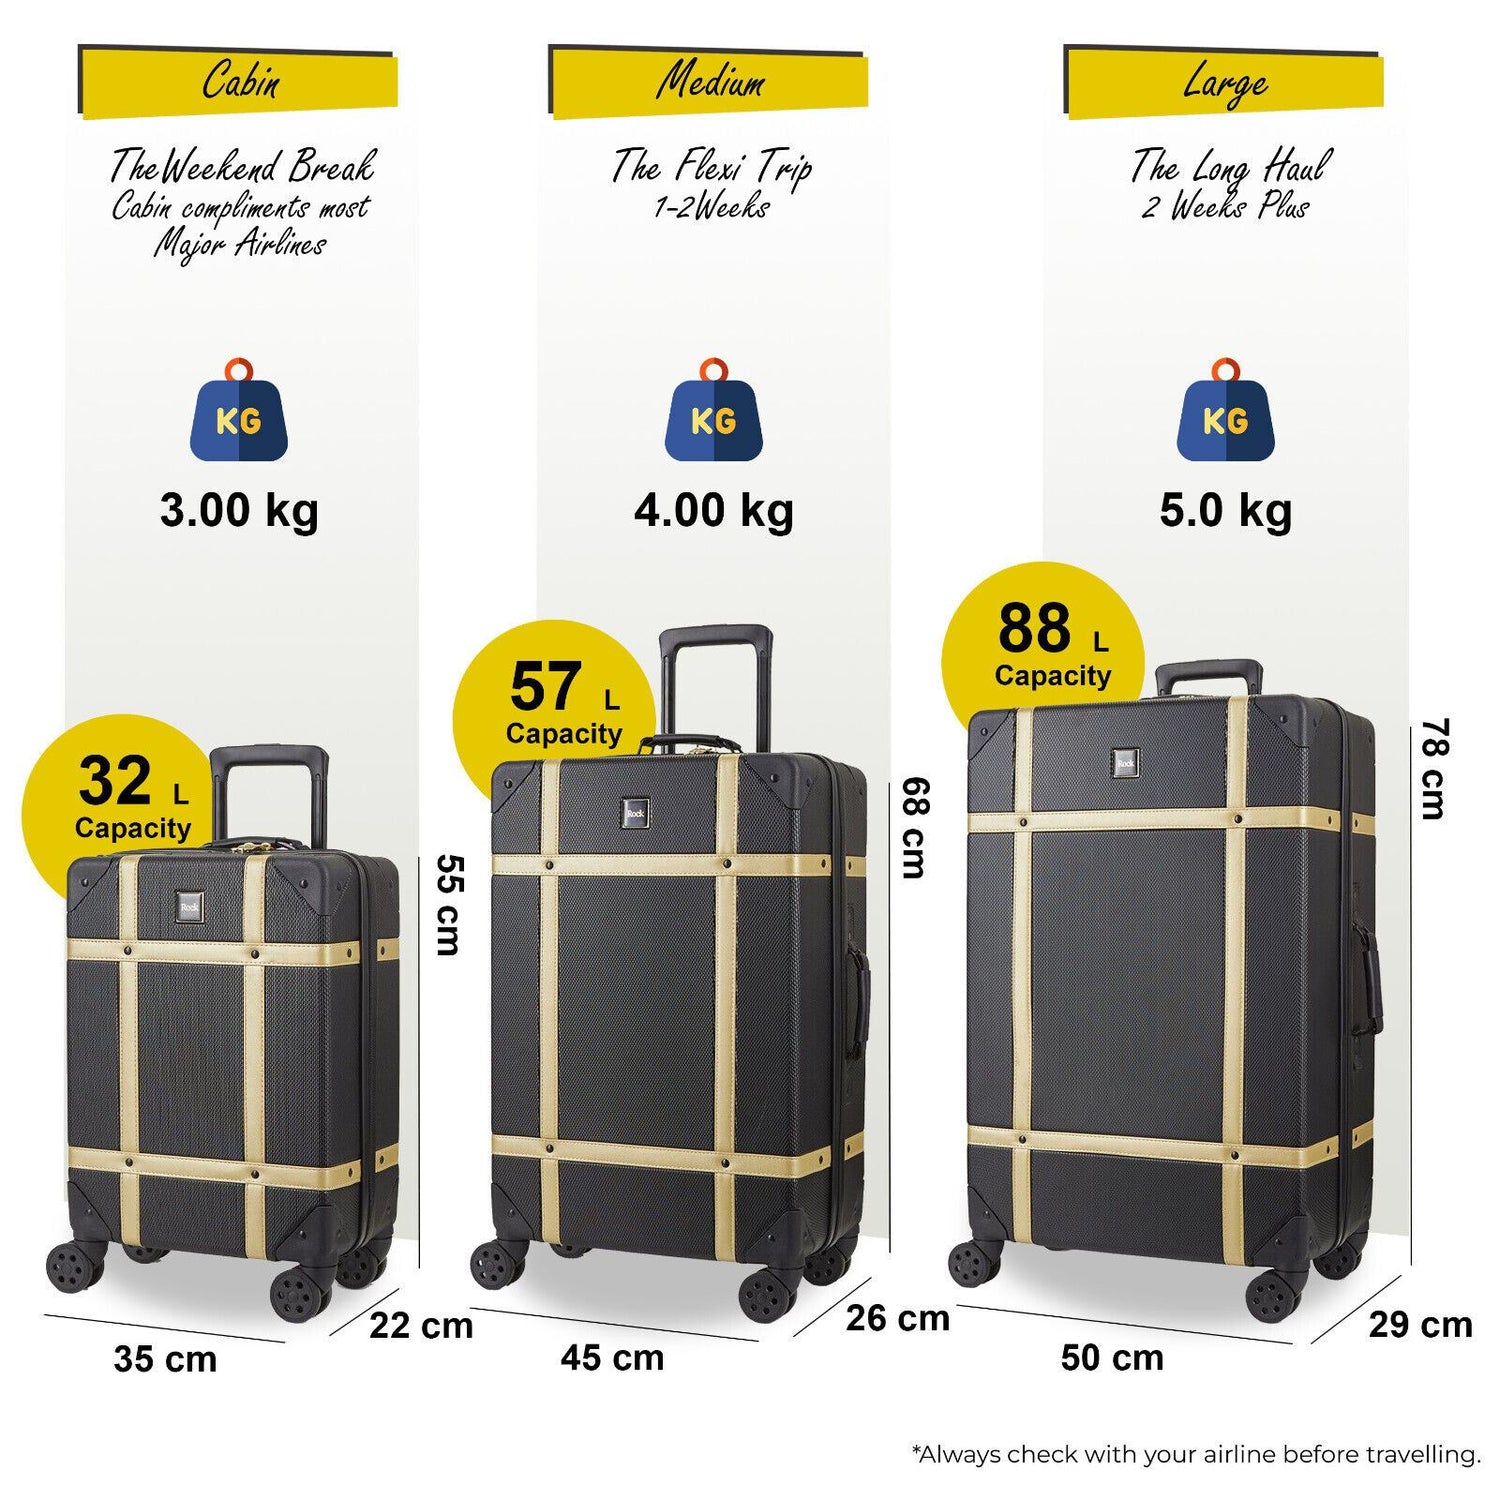 Alexandria Set of 3 Hard Shell Suitcase in Black Gold